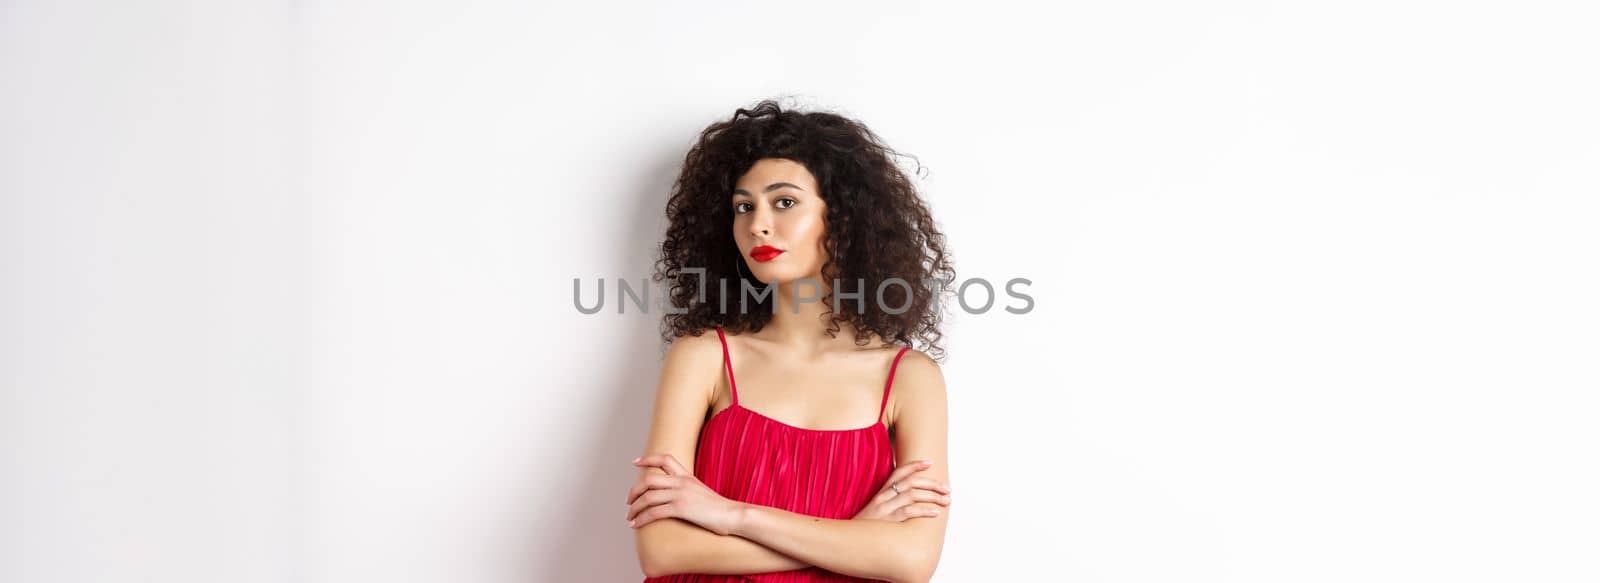 Sassy woman with curly hairstyle, wearing red dress and makeup, cross arms on chest, standing over white background.